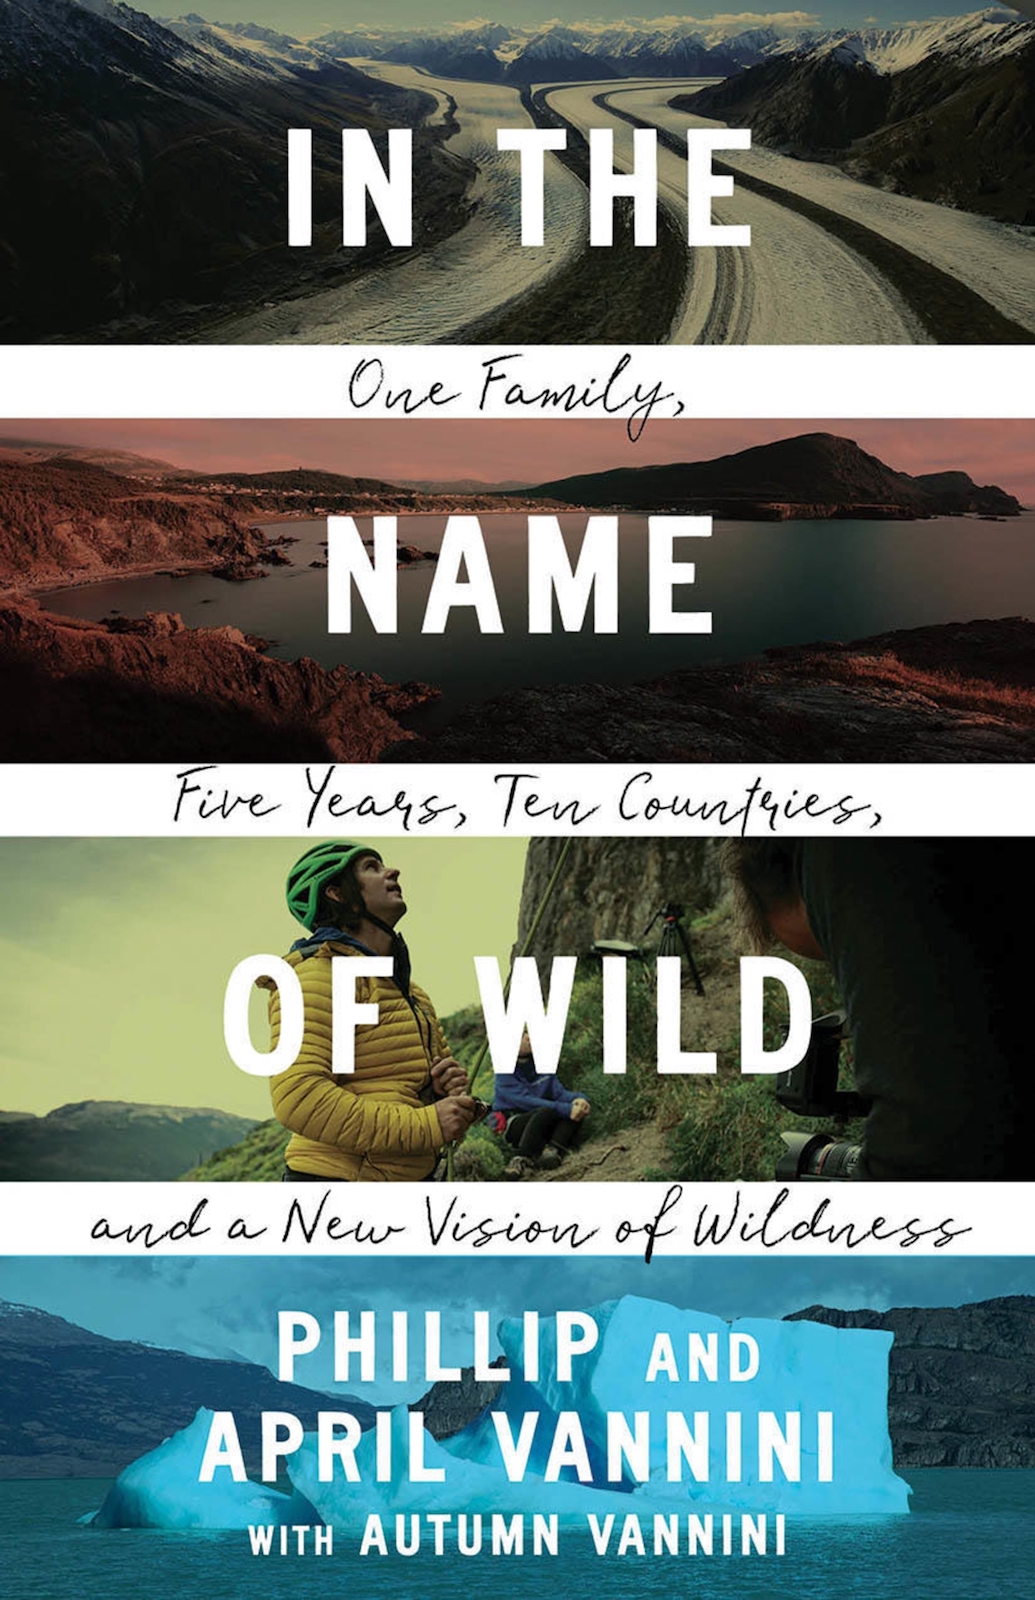 The Meaning of Wild